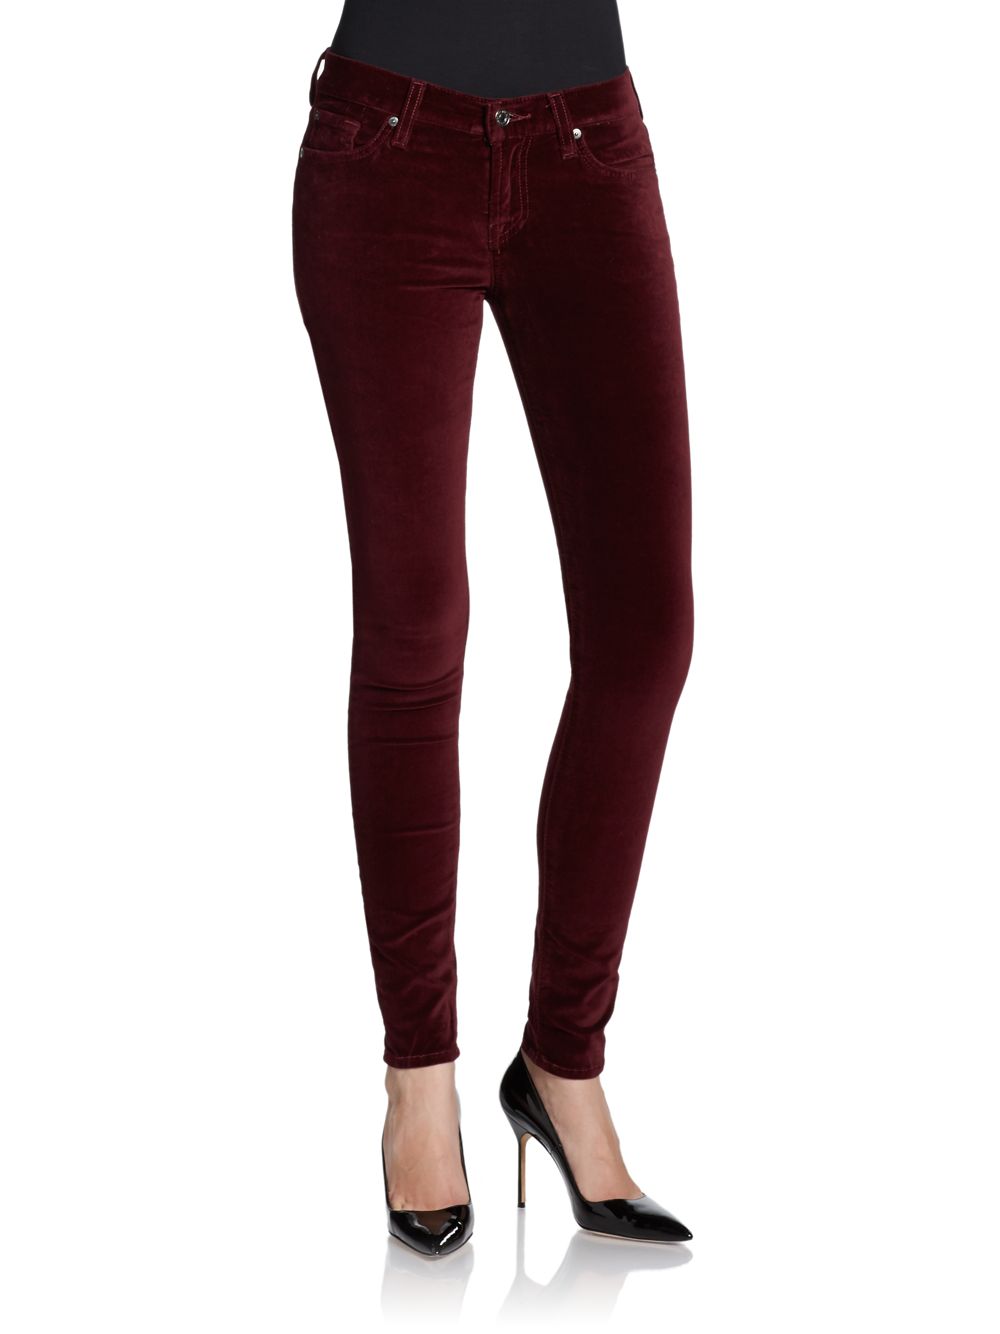 Lyst - 7 For All Mankind Gwenevere Velvet Skinny Pants in Brown